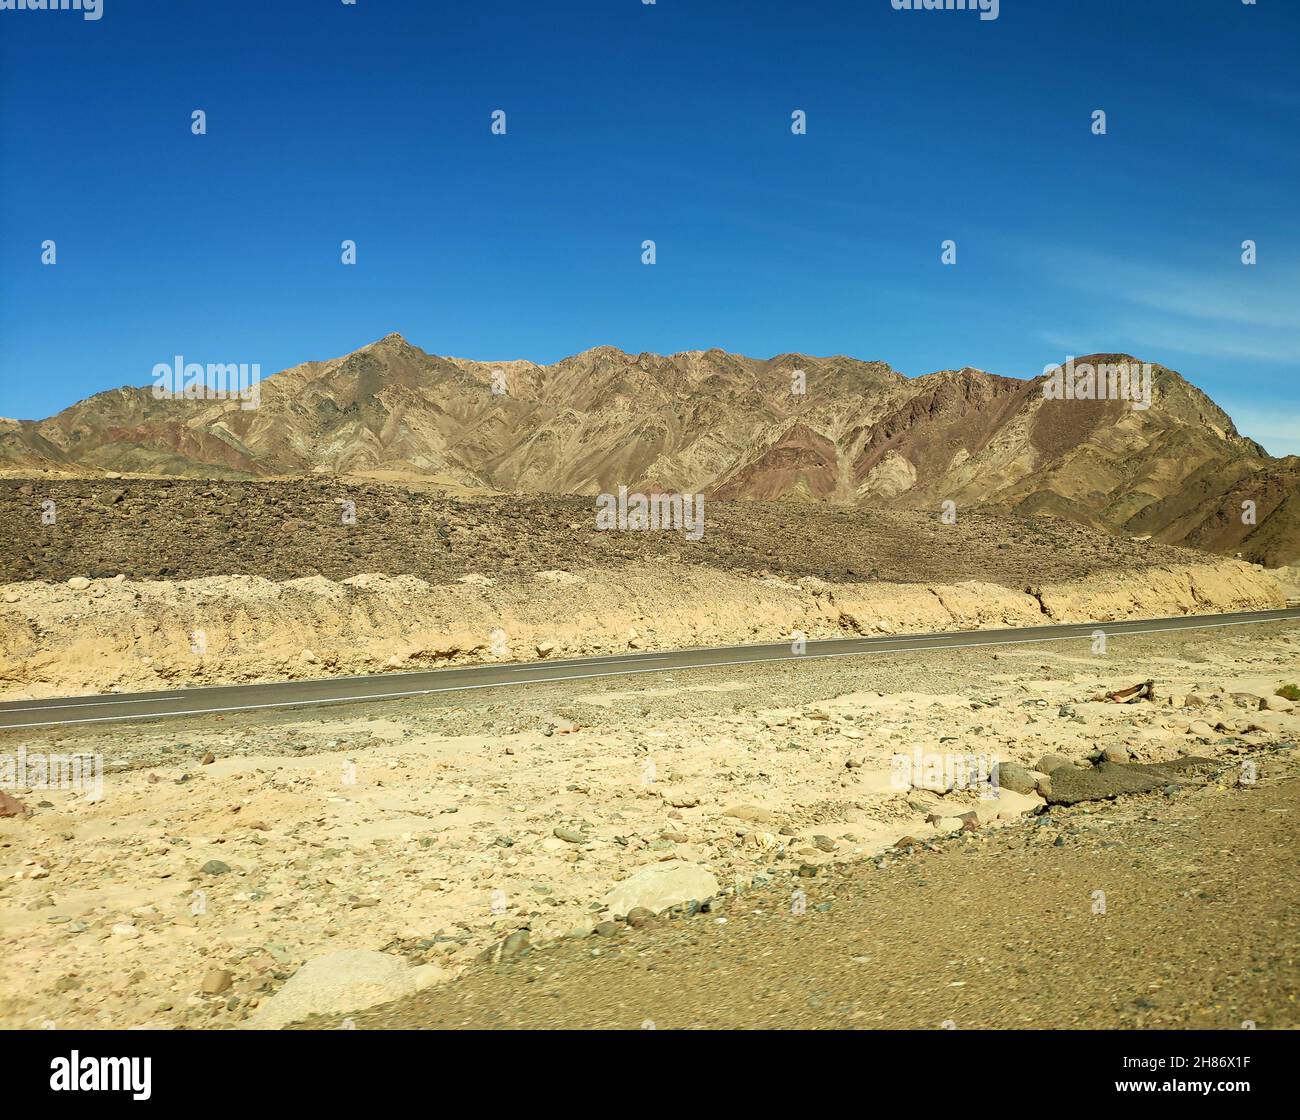 Road in the Sinai desert, picturesque background with mountains and hills, desert landscape wallpaper Stock Photo